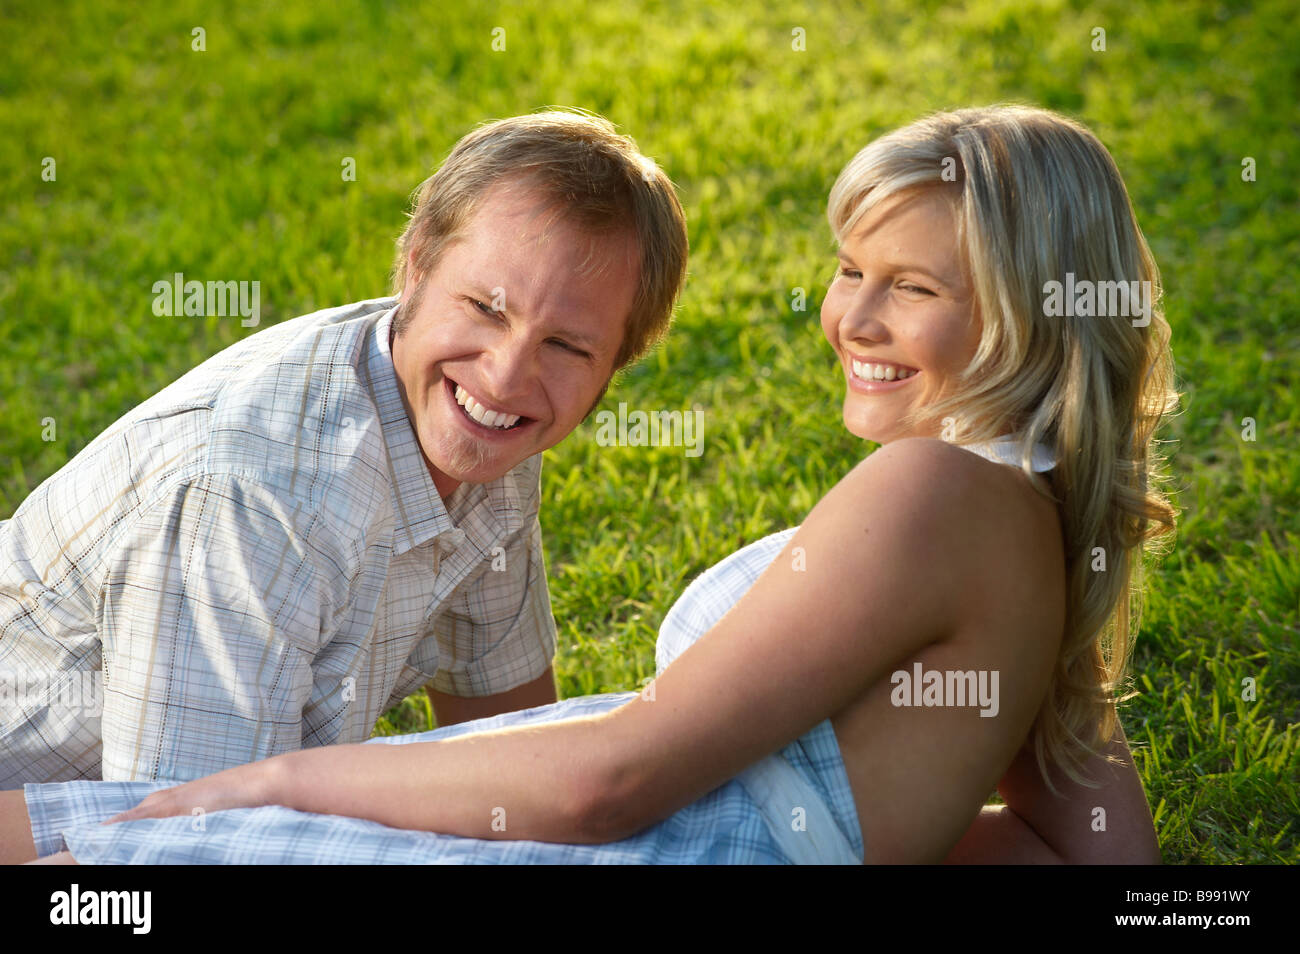 Couple lying on grass in park Banque D'Images